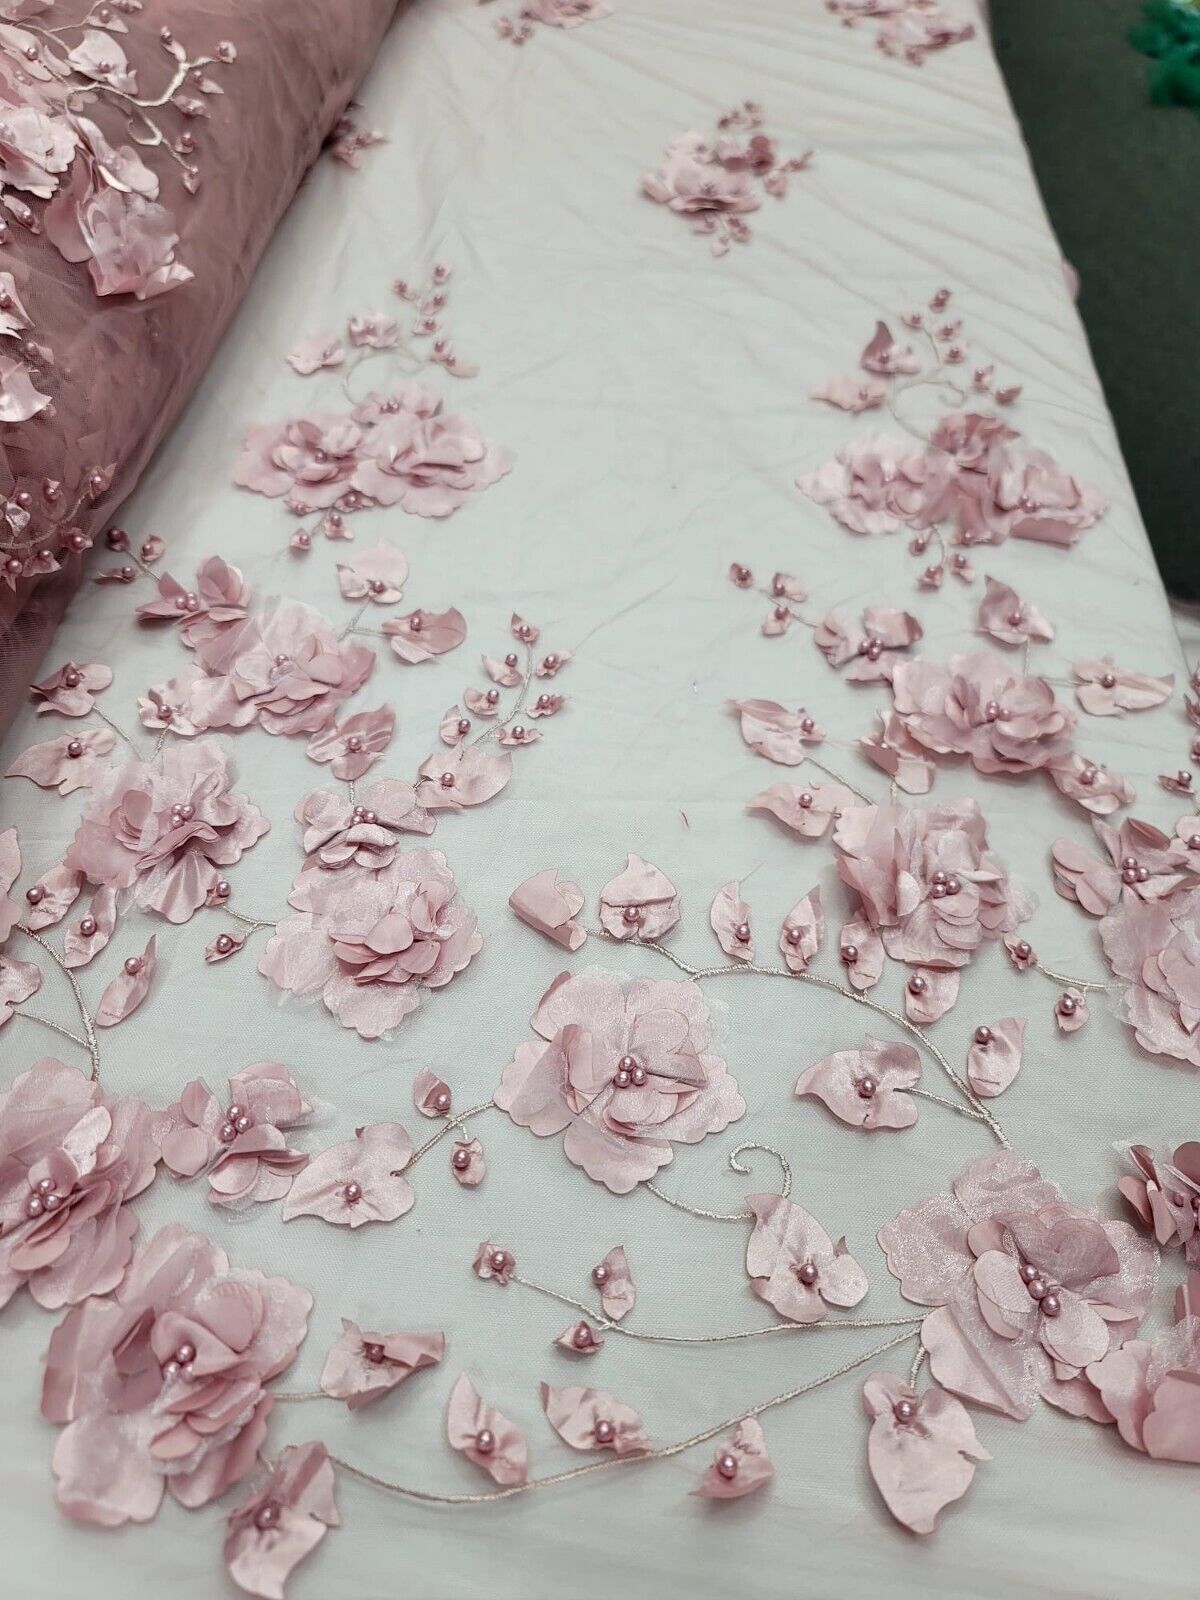 3D Rose Plant Lace Dusty Rose Embroidered Flower Design Rose Fabric by Yard PROM